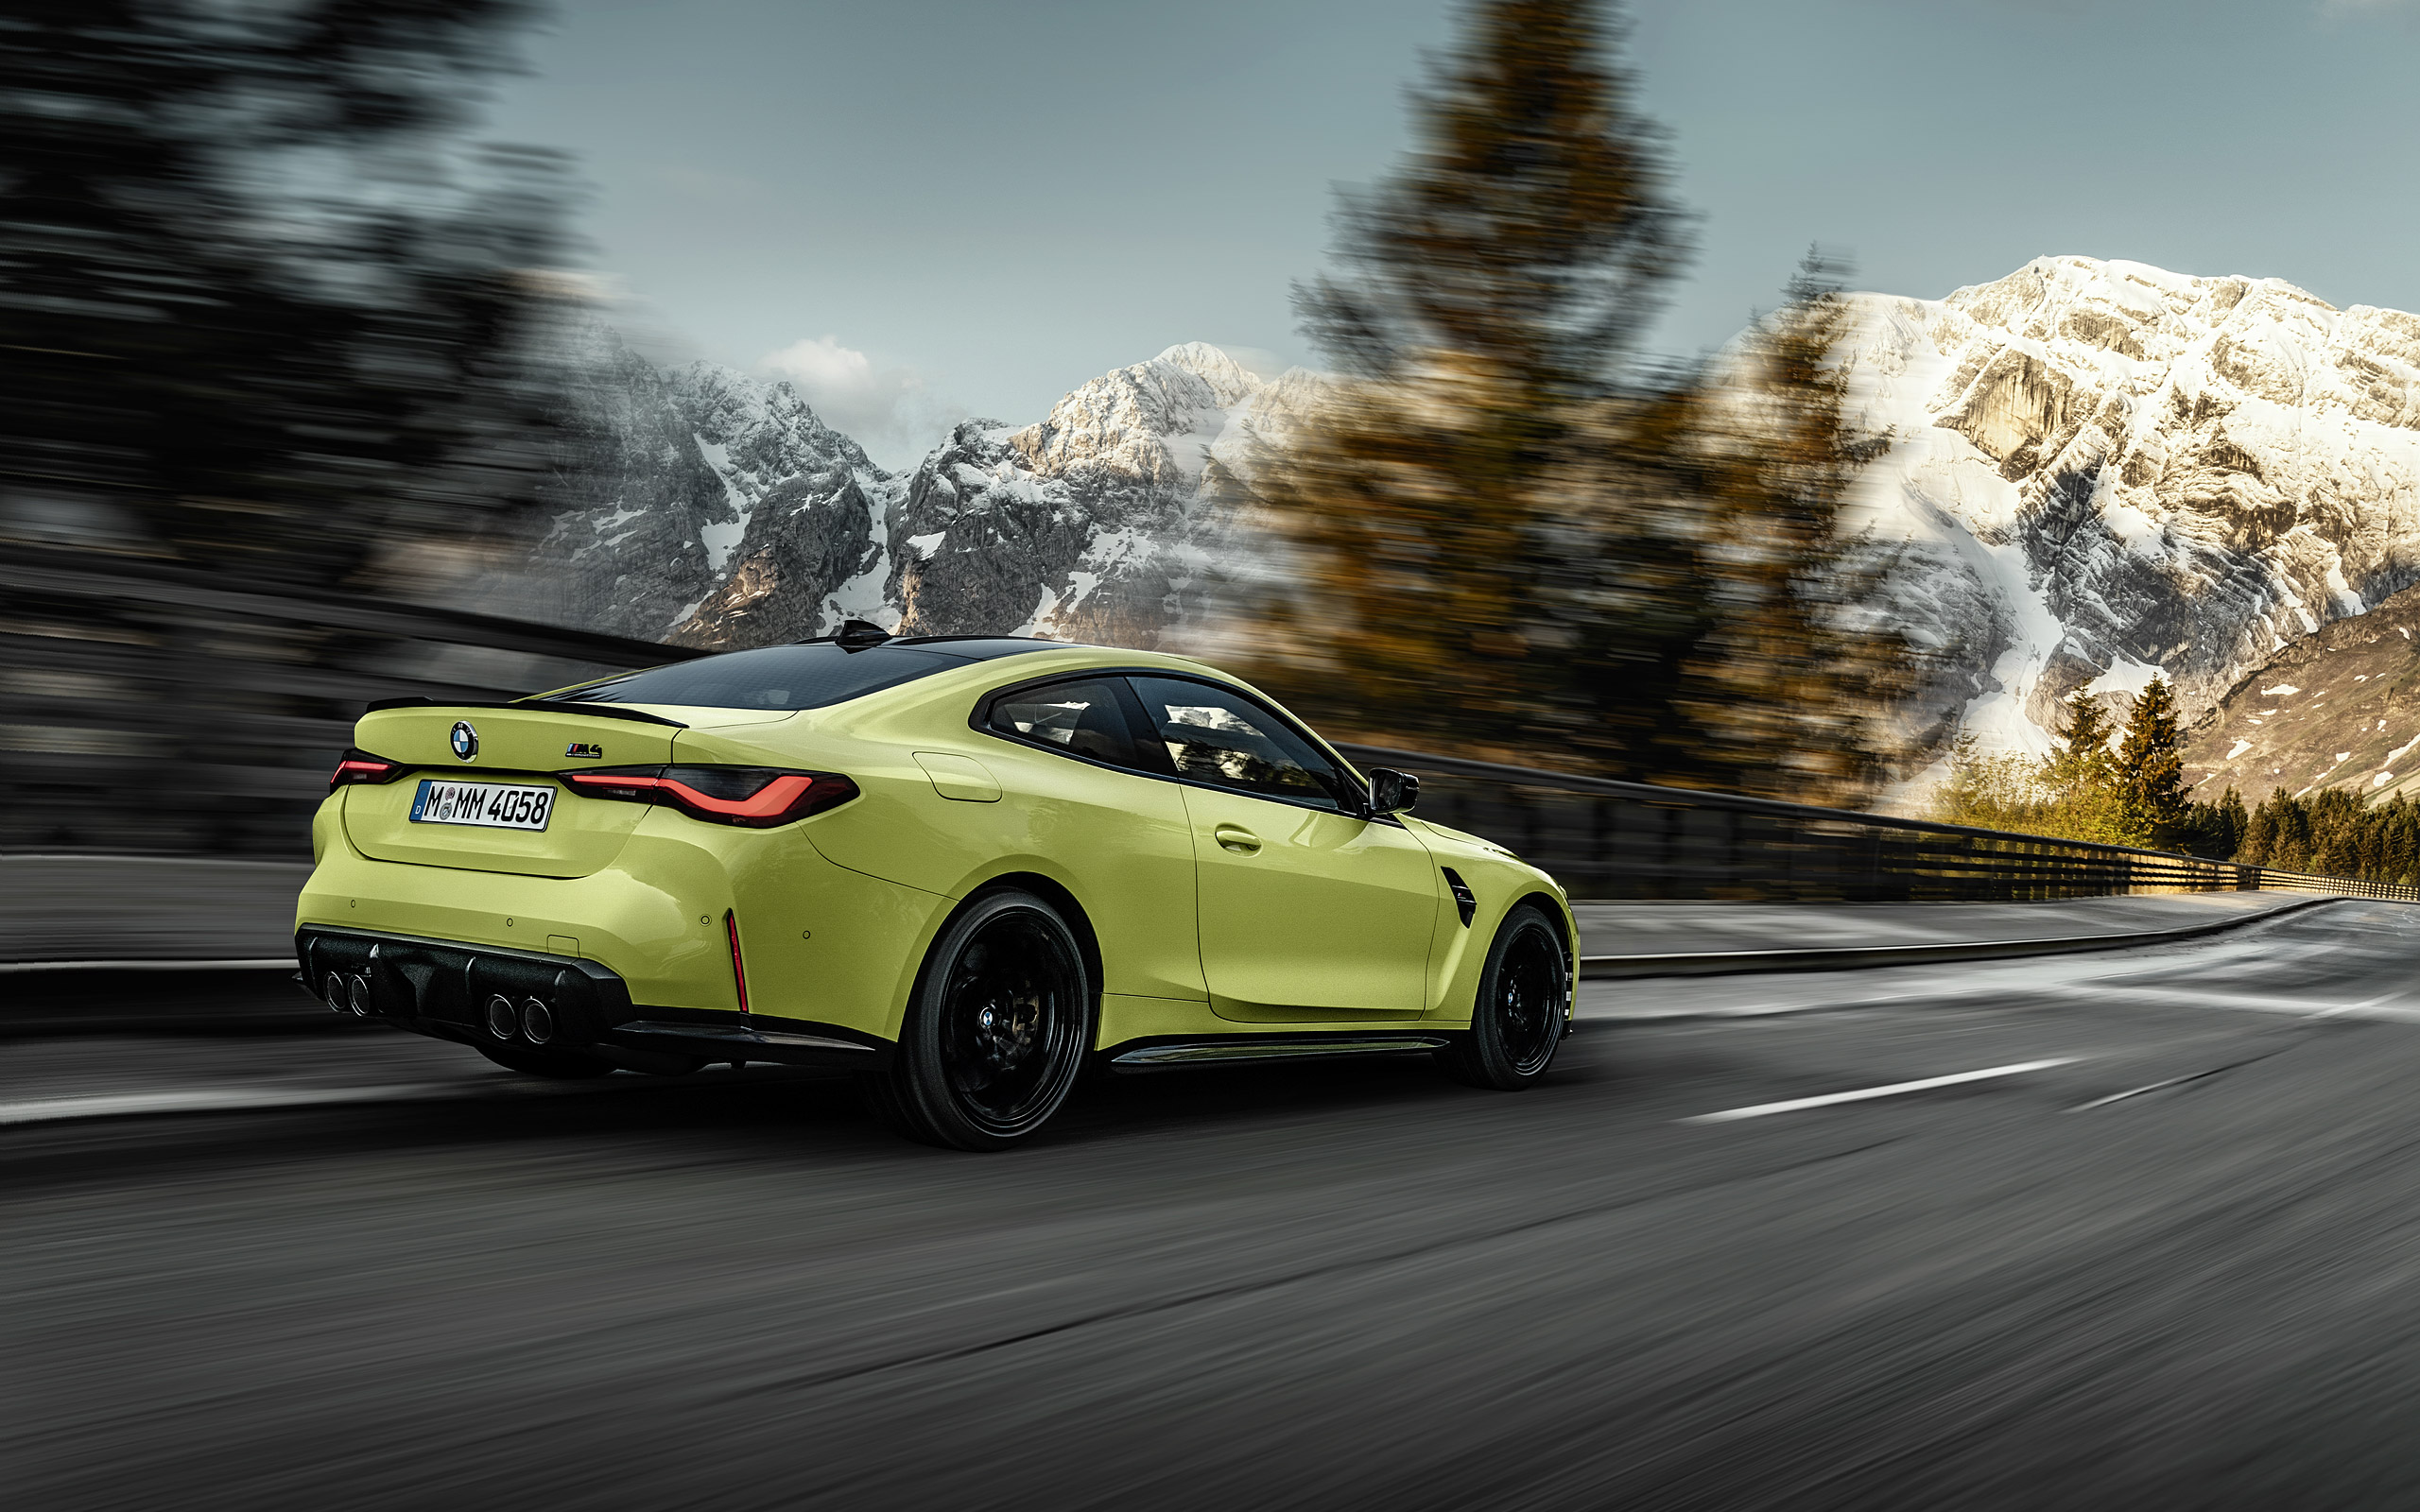  2021 BMW M4 Competition Wallpaper.